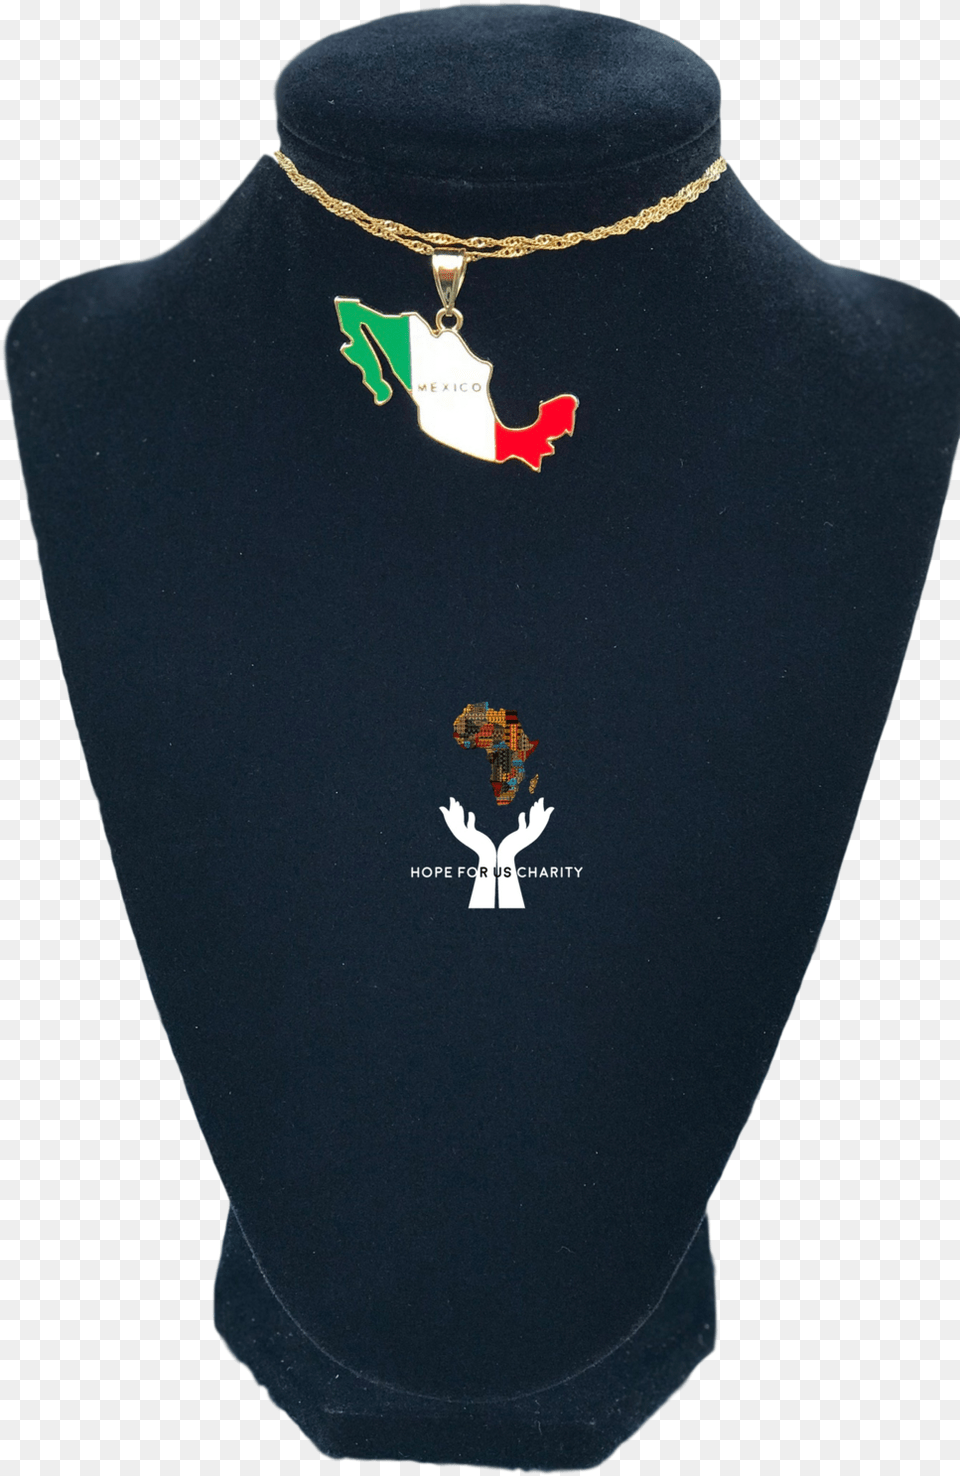 Mexico Colored Flag Clipped Rev 1 The Hope For Us Charity, Accessories, Pendant, Jewelry, Necklace Png